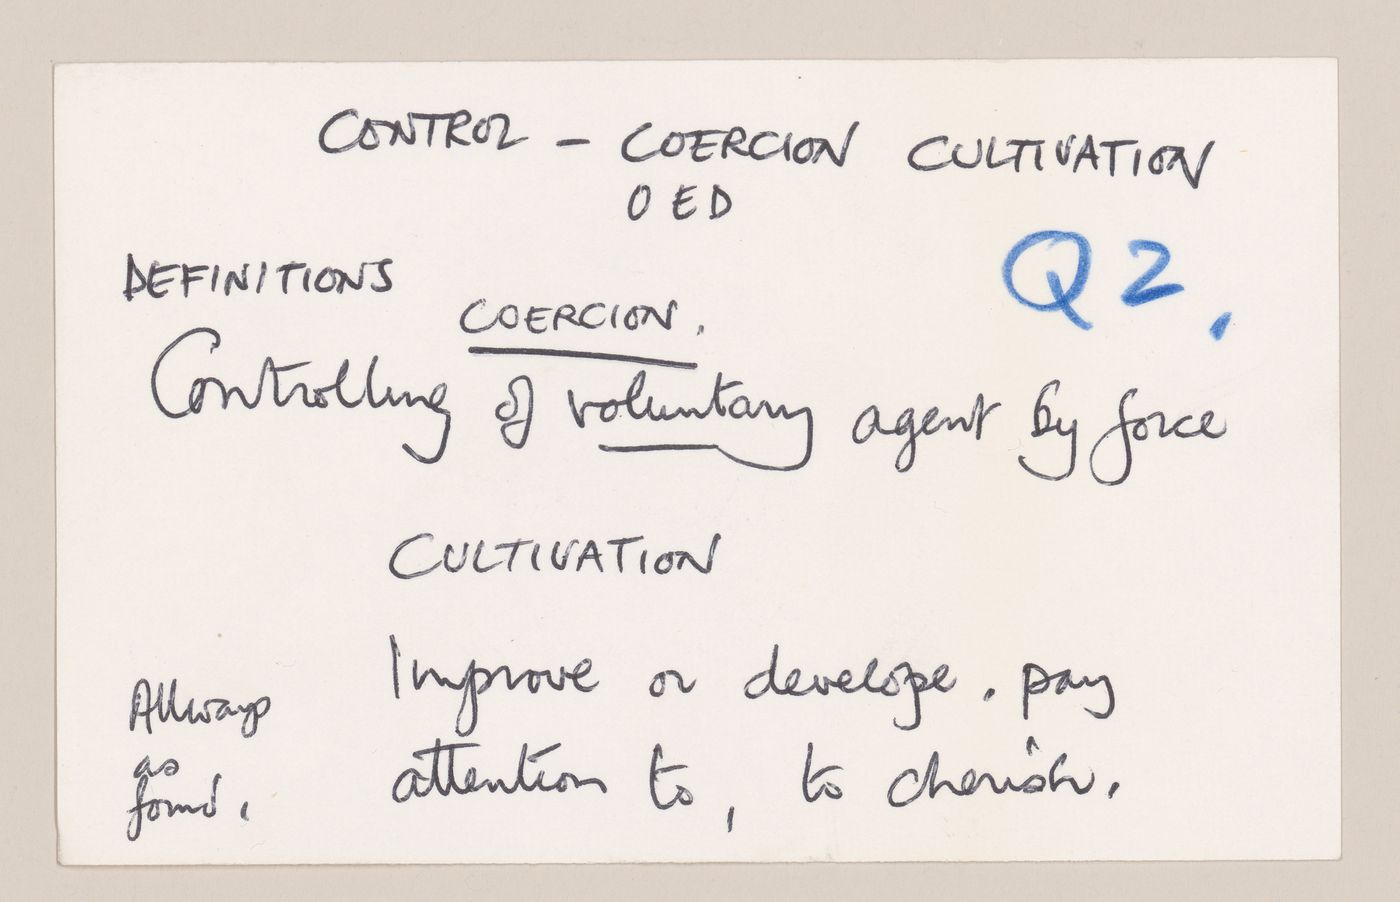 Notes for AA lecture 6 "Control: Coercion or Cultivation"